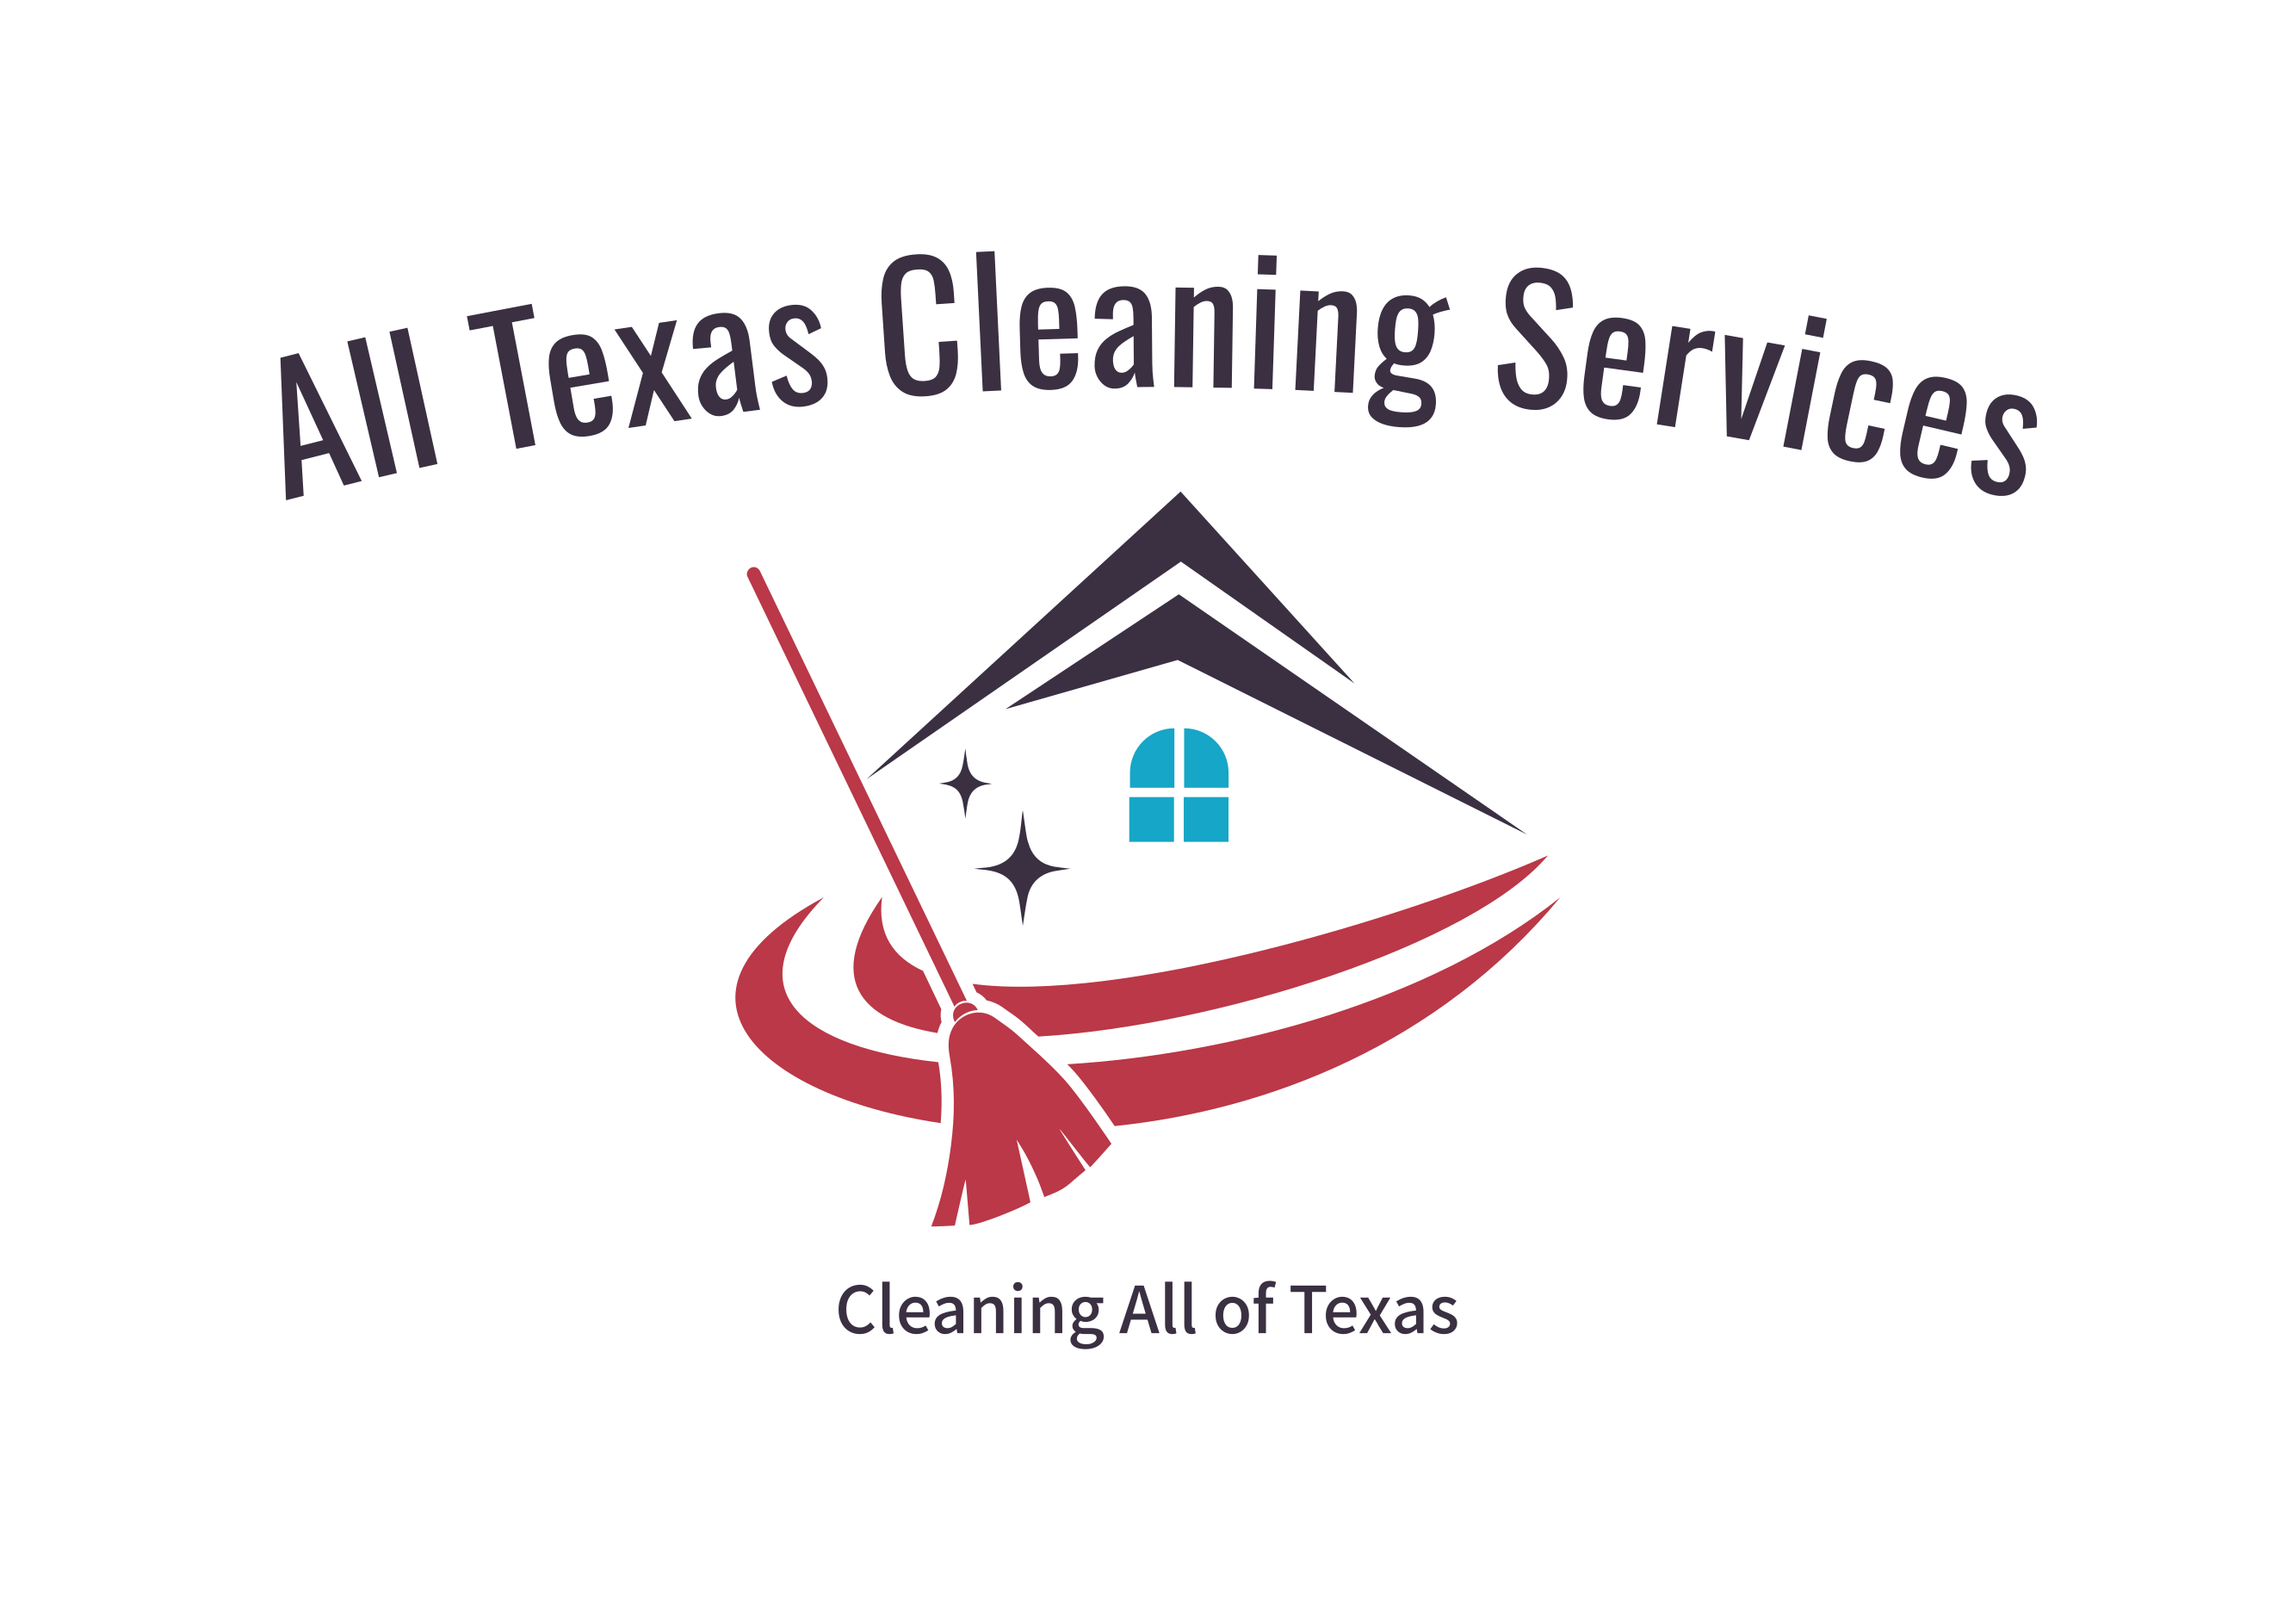 All Texas Cleaning Services